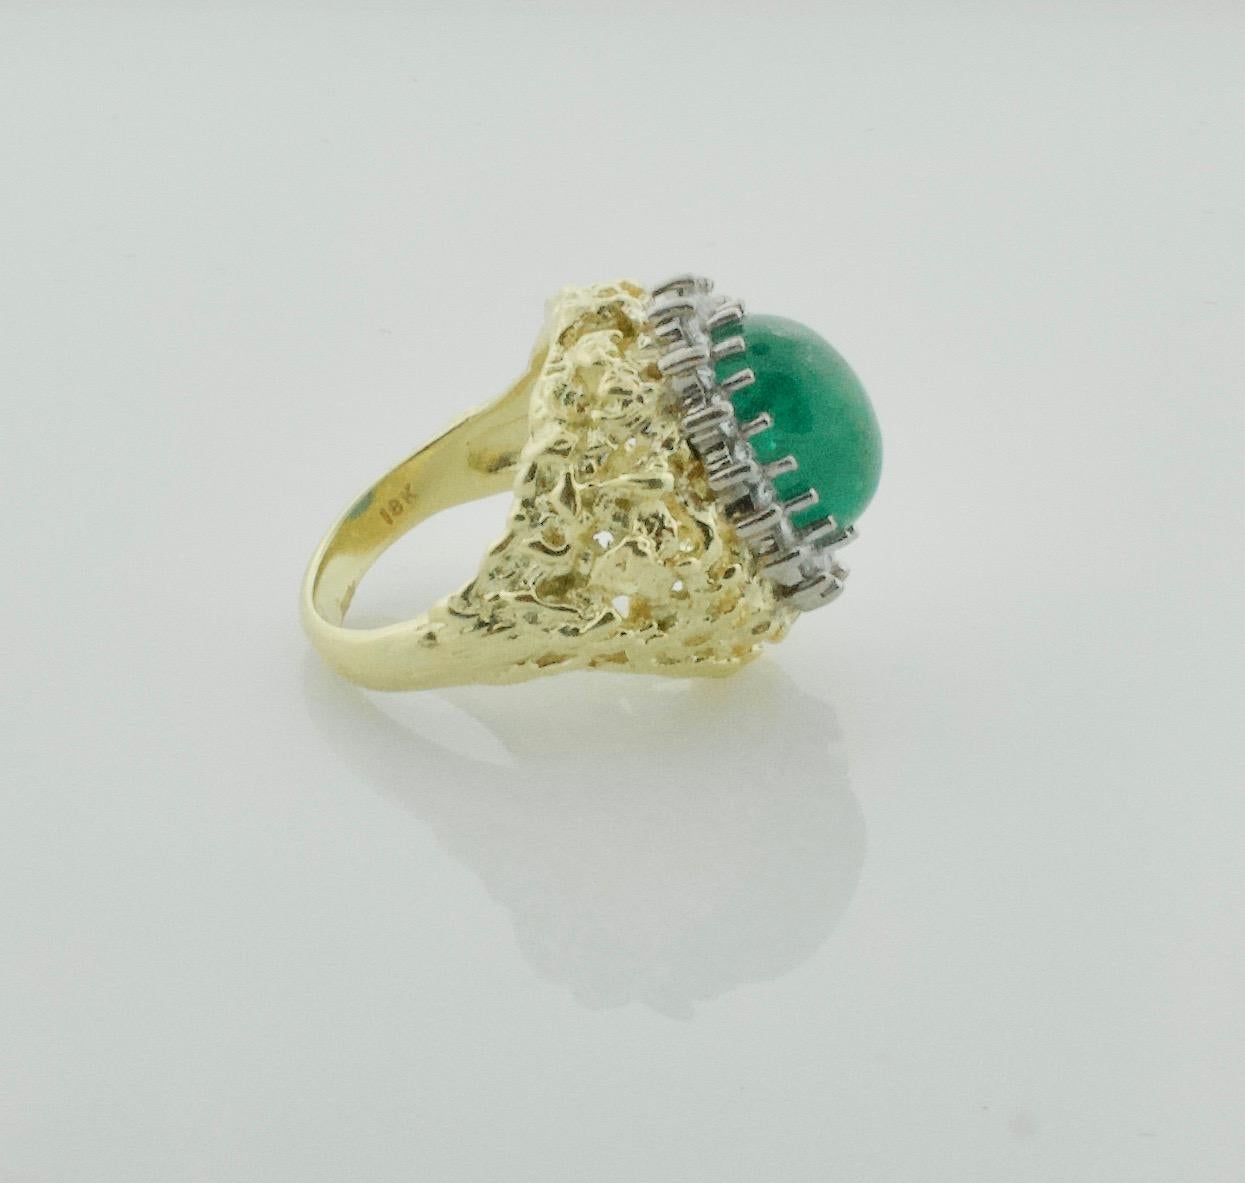 Cabochon Emerald and Diamond Ring in 18k Yellow Gold Circa 1960's
One Oval Cabochon Emerald Weighing 4.50 Carats Approximately (12.7 x 9.2 x 5.4 mm)
17 Round Brilliant Cut Diamonds Weighing .70 Carats Approximately [GH - VVS]
Currently Size 6.5 Can